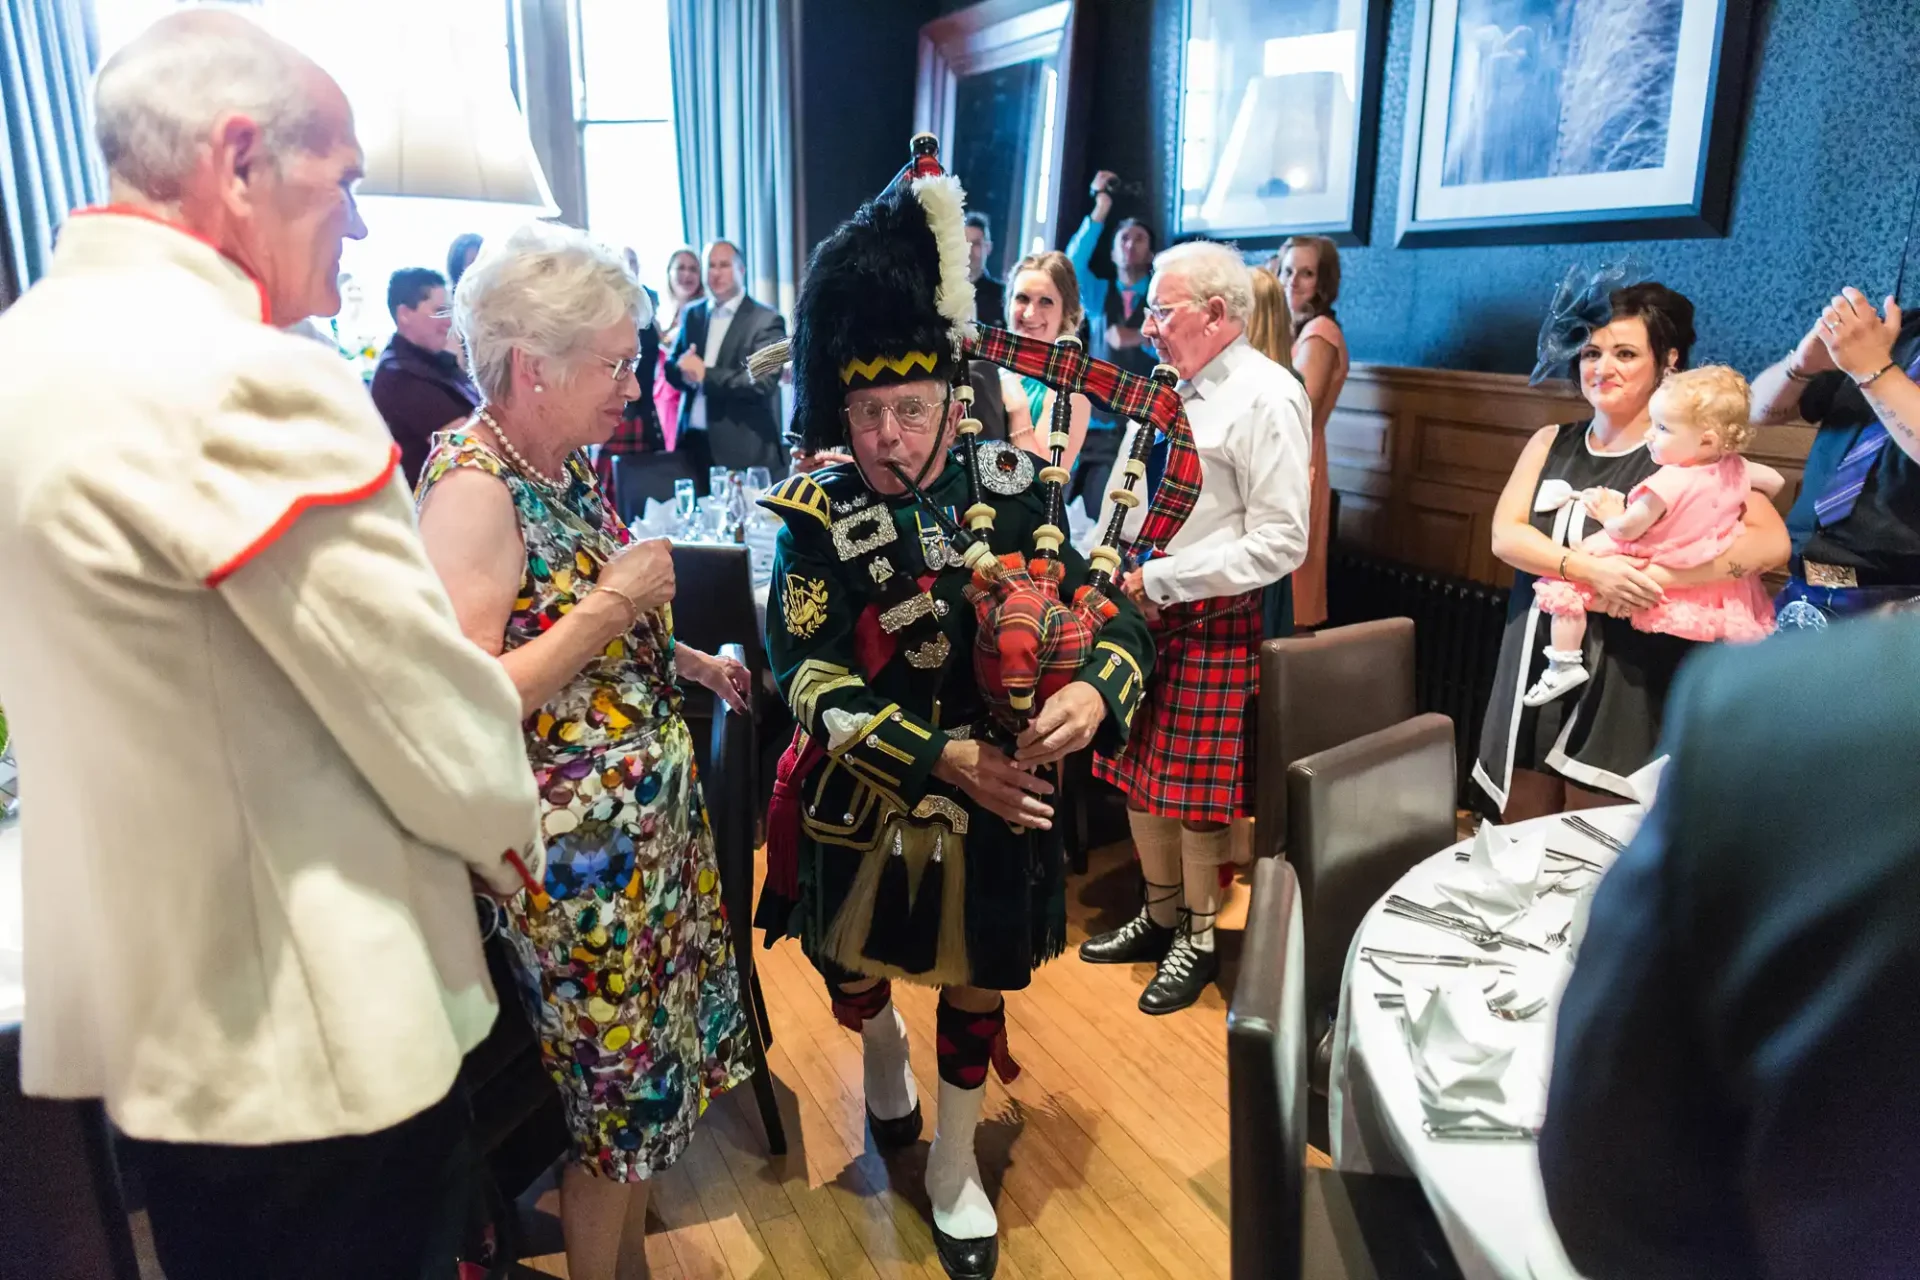 A bagpiper in traditional scottish attire playing at a lively indoor event with guests in casual and formal wear watching and interacting.